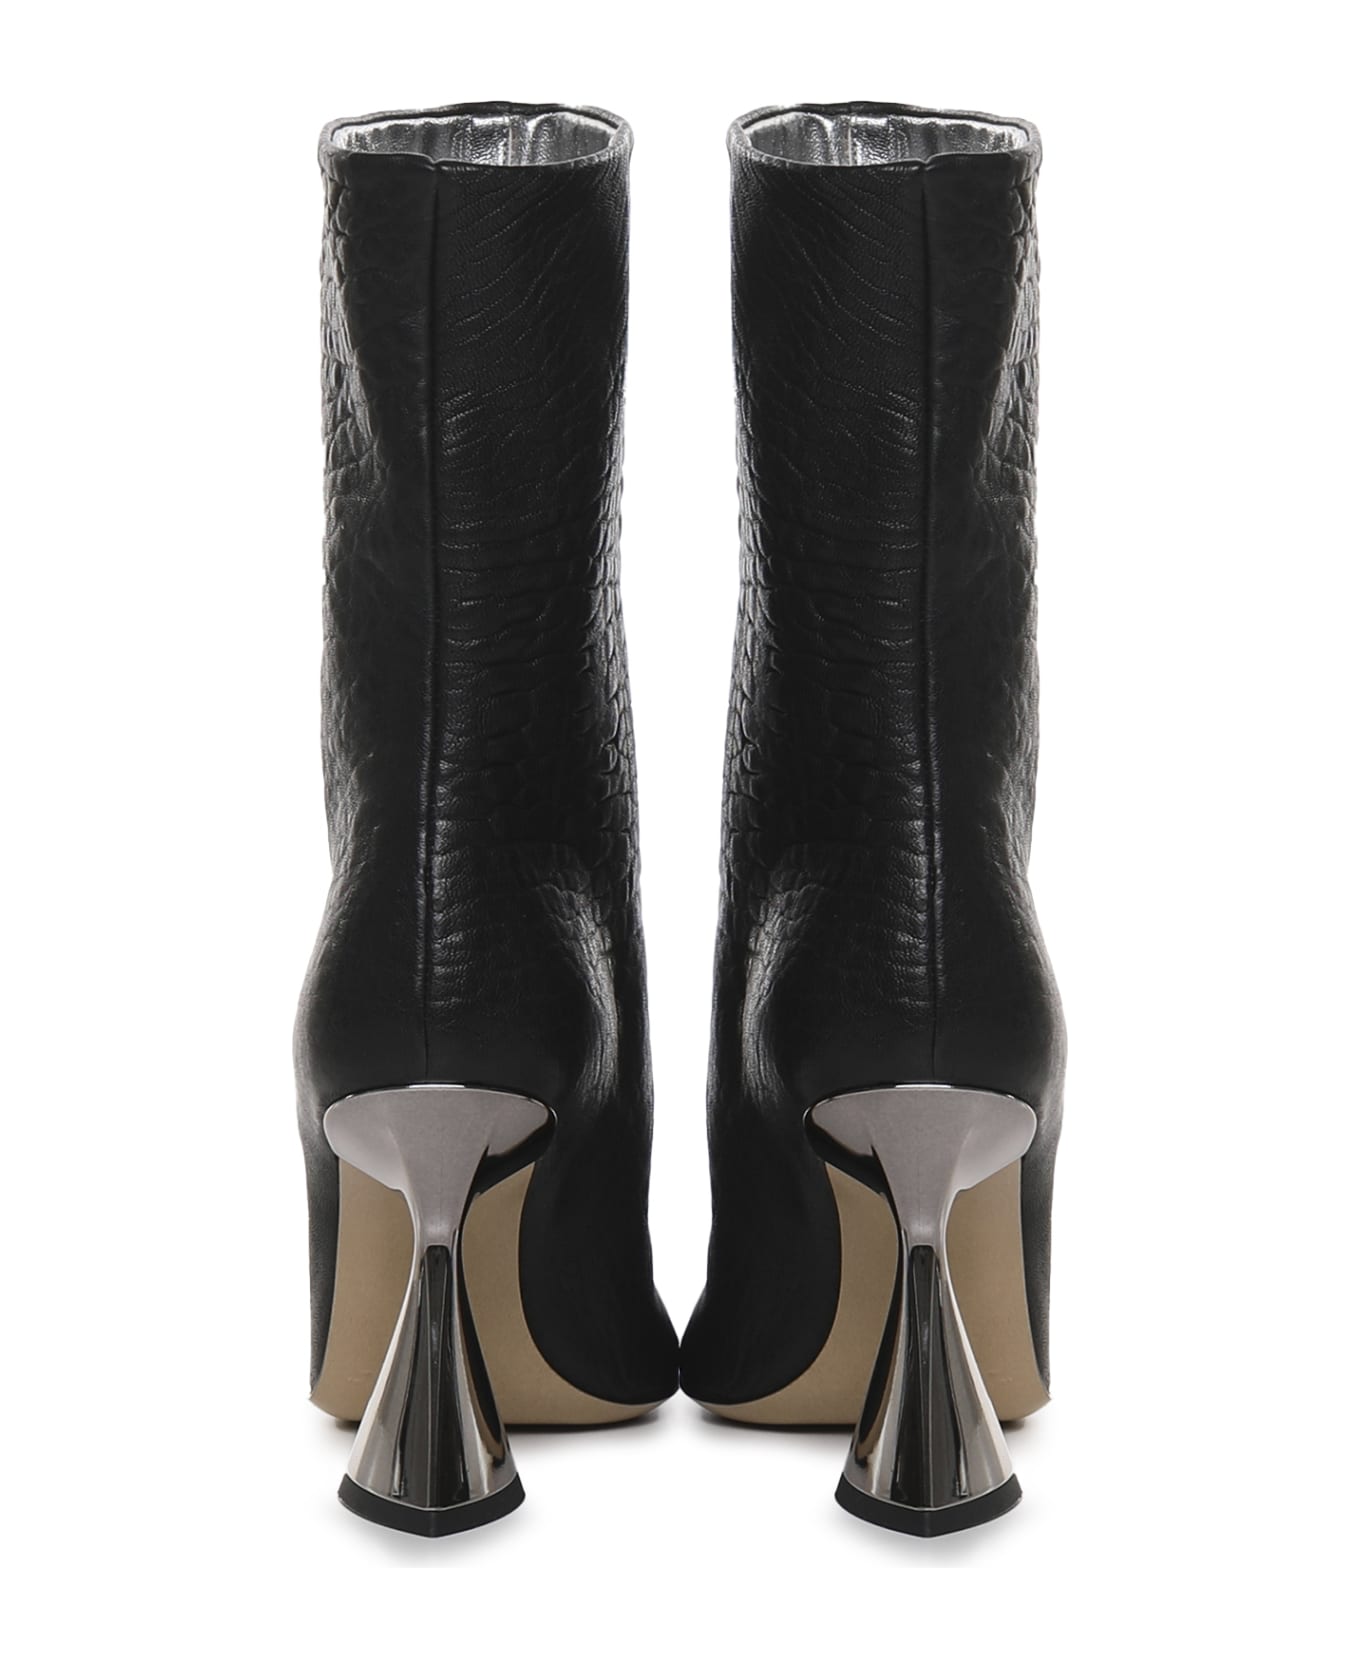 Alchimia Ankle Boots With Contrasting Toe - Black